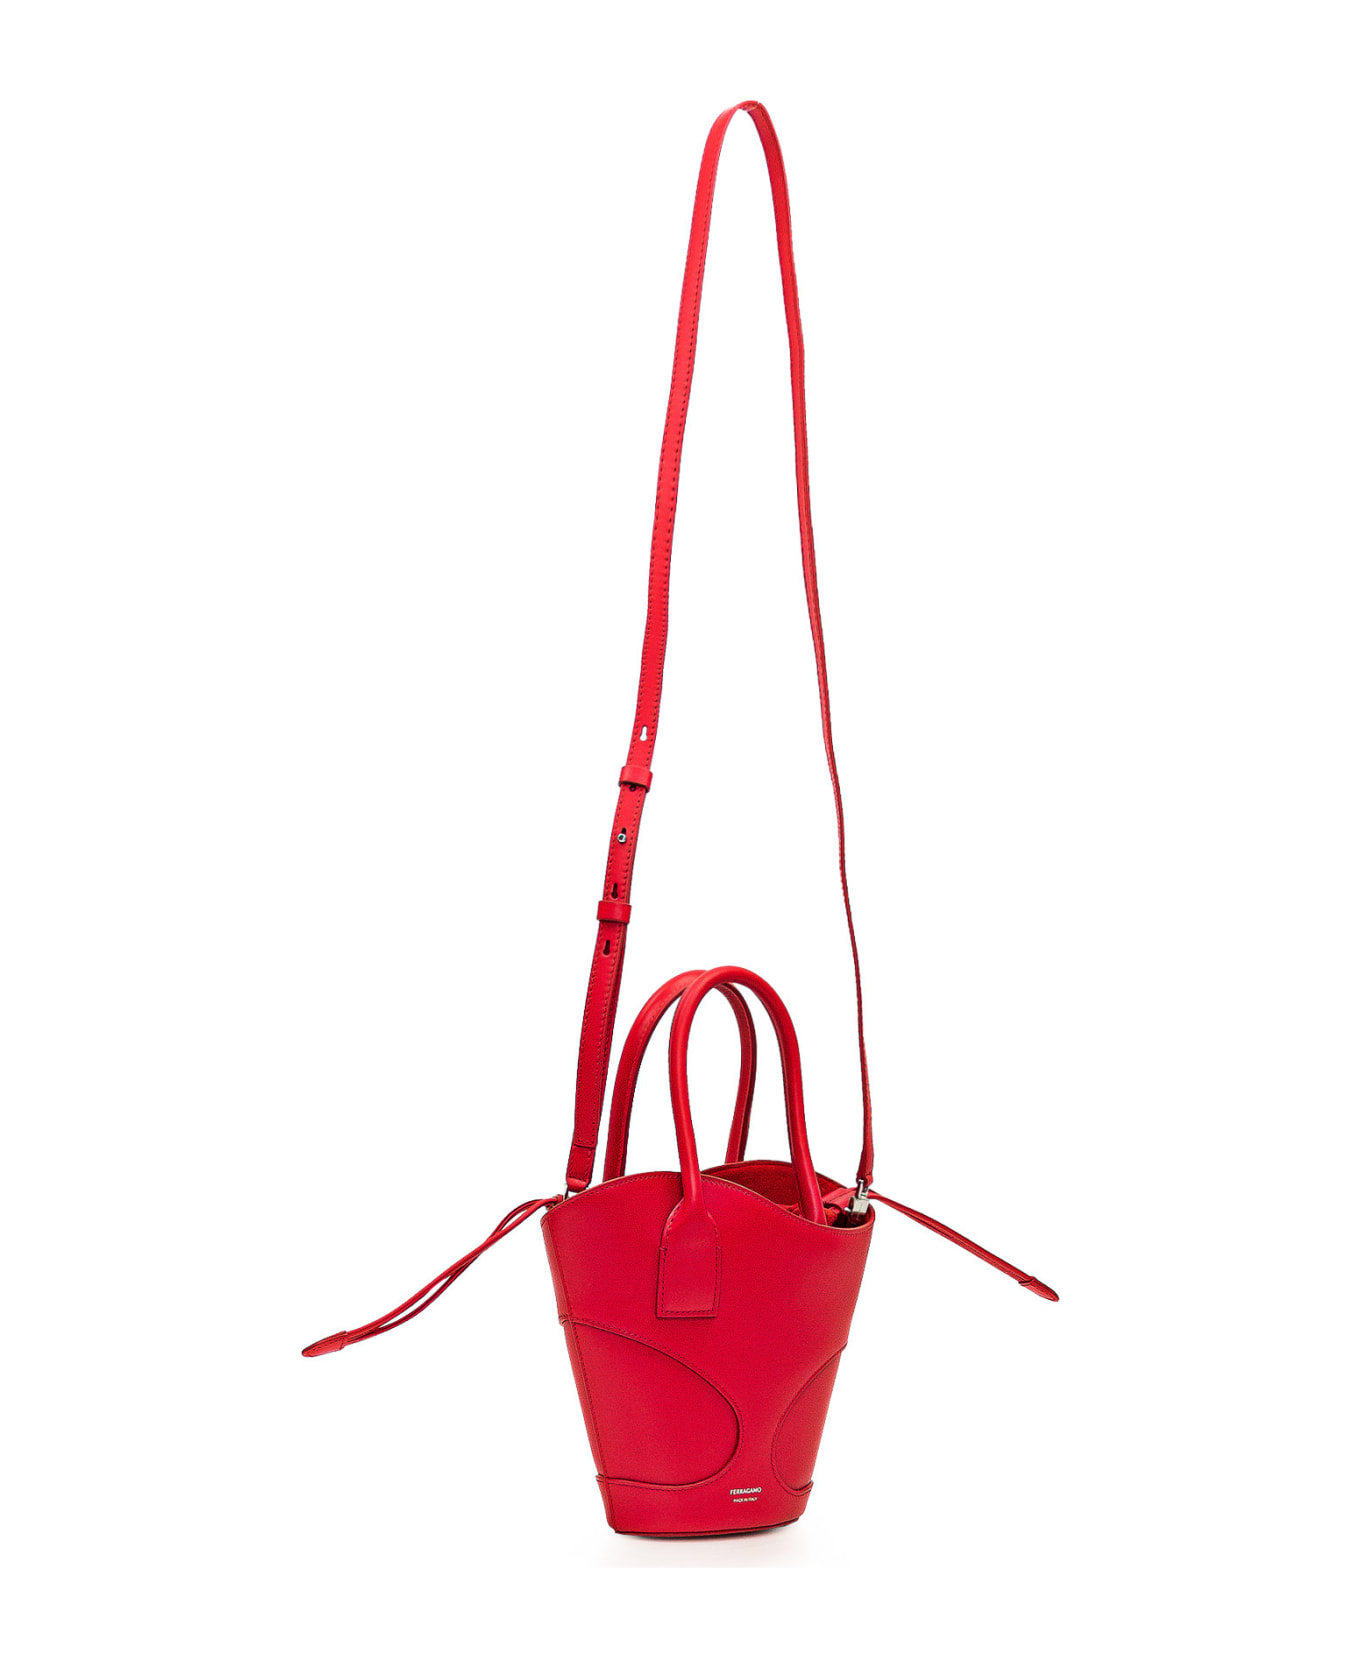 Ferragamo Tote Bag With Cut Out (s) - FLAME RED